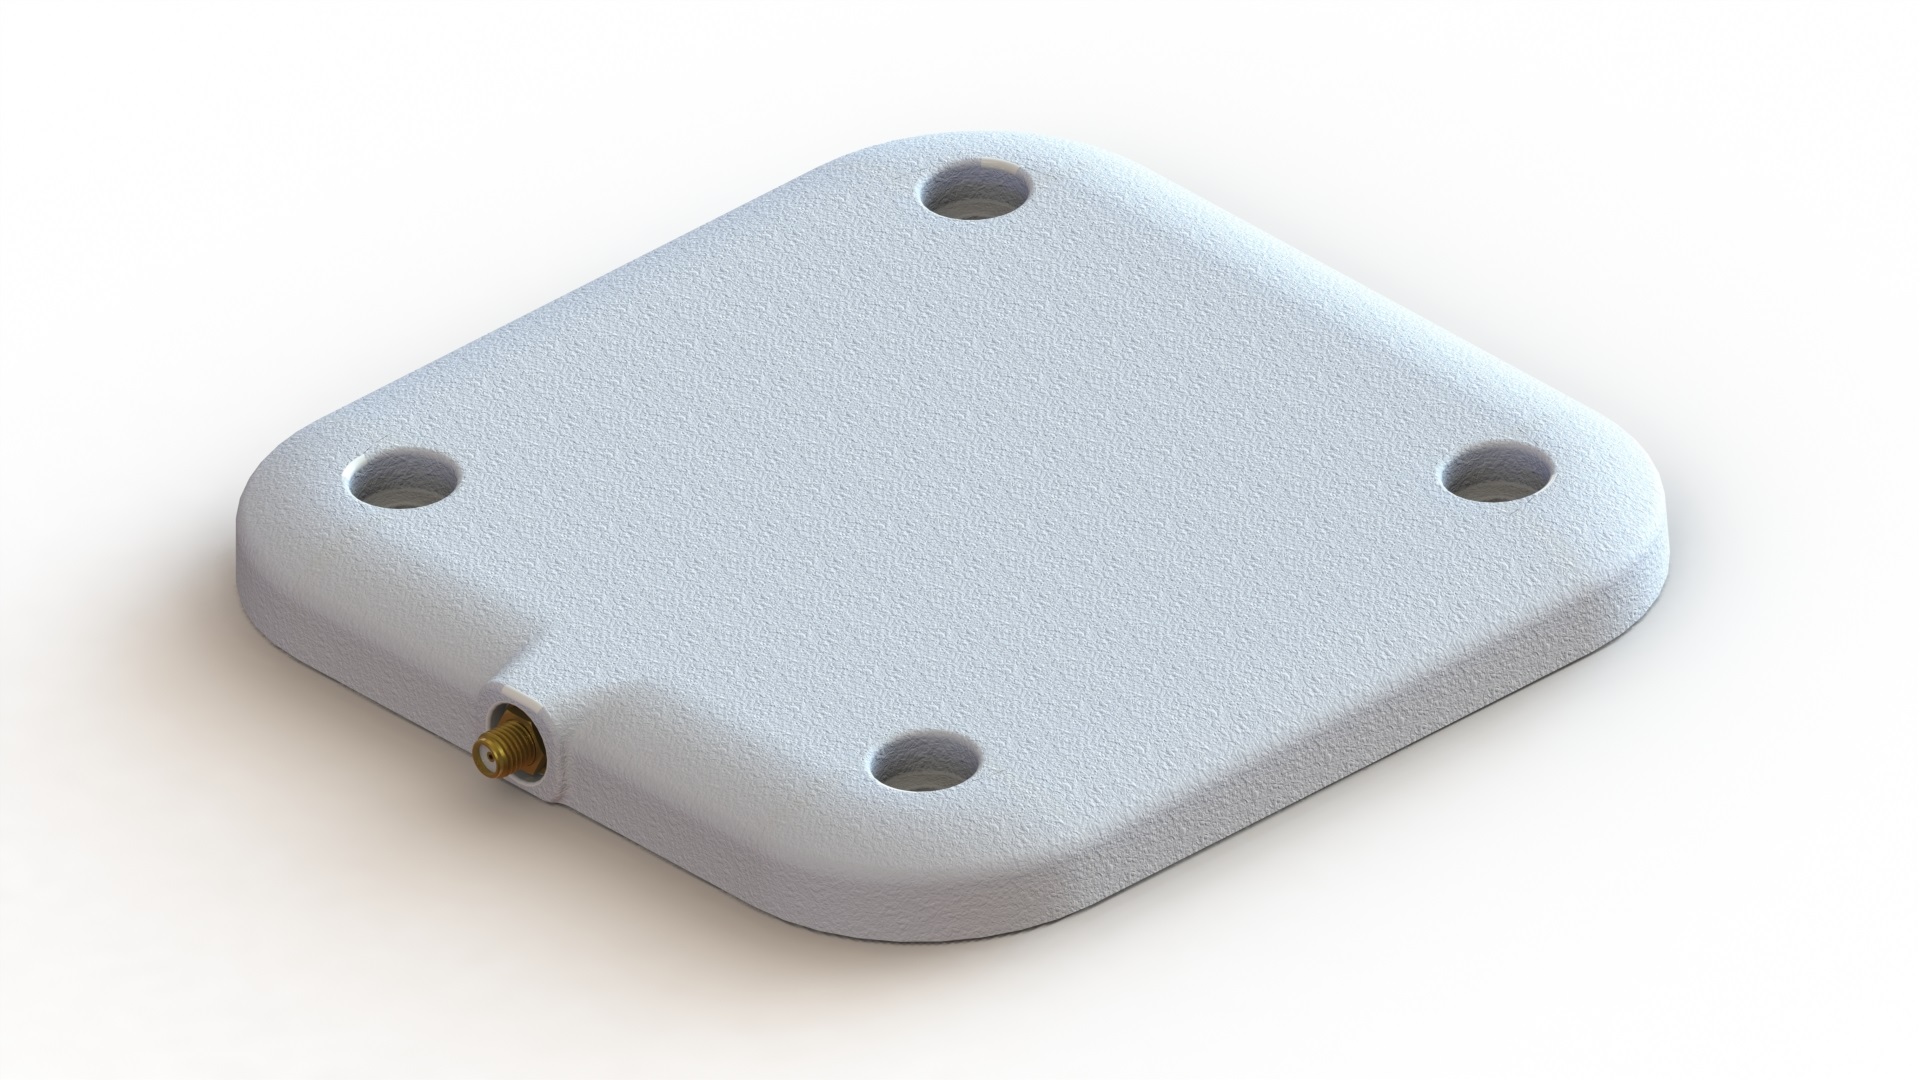 Industry Leading IP69K Rated RAIN (UHF) RFID Antenna Launched